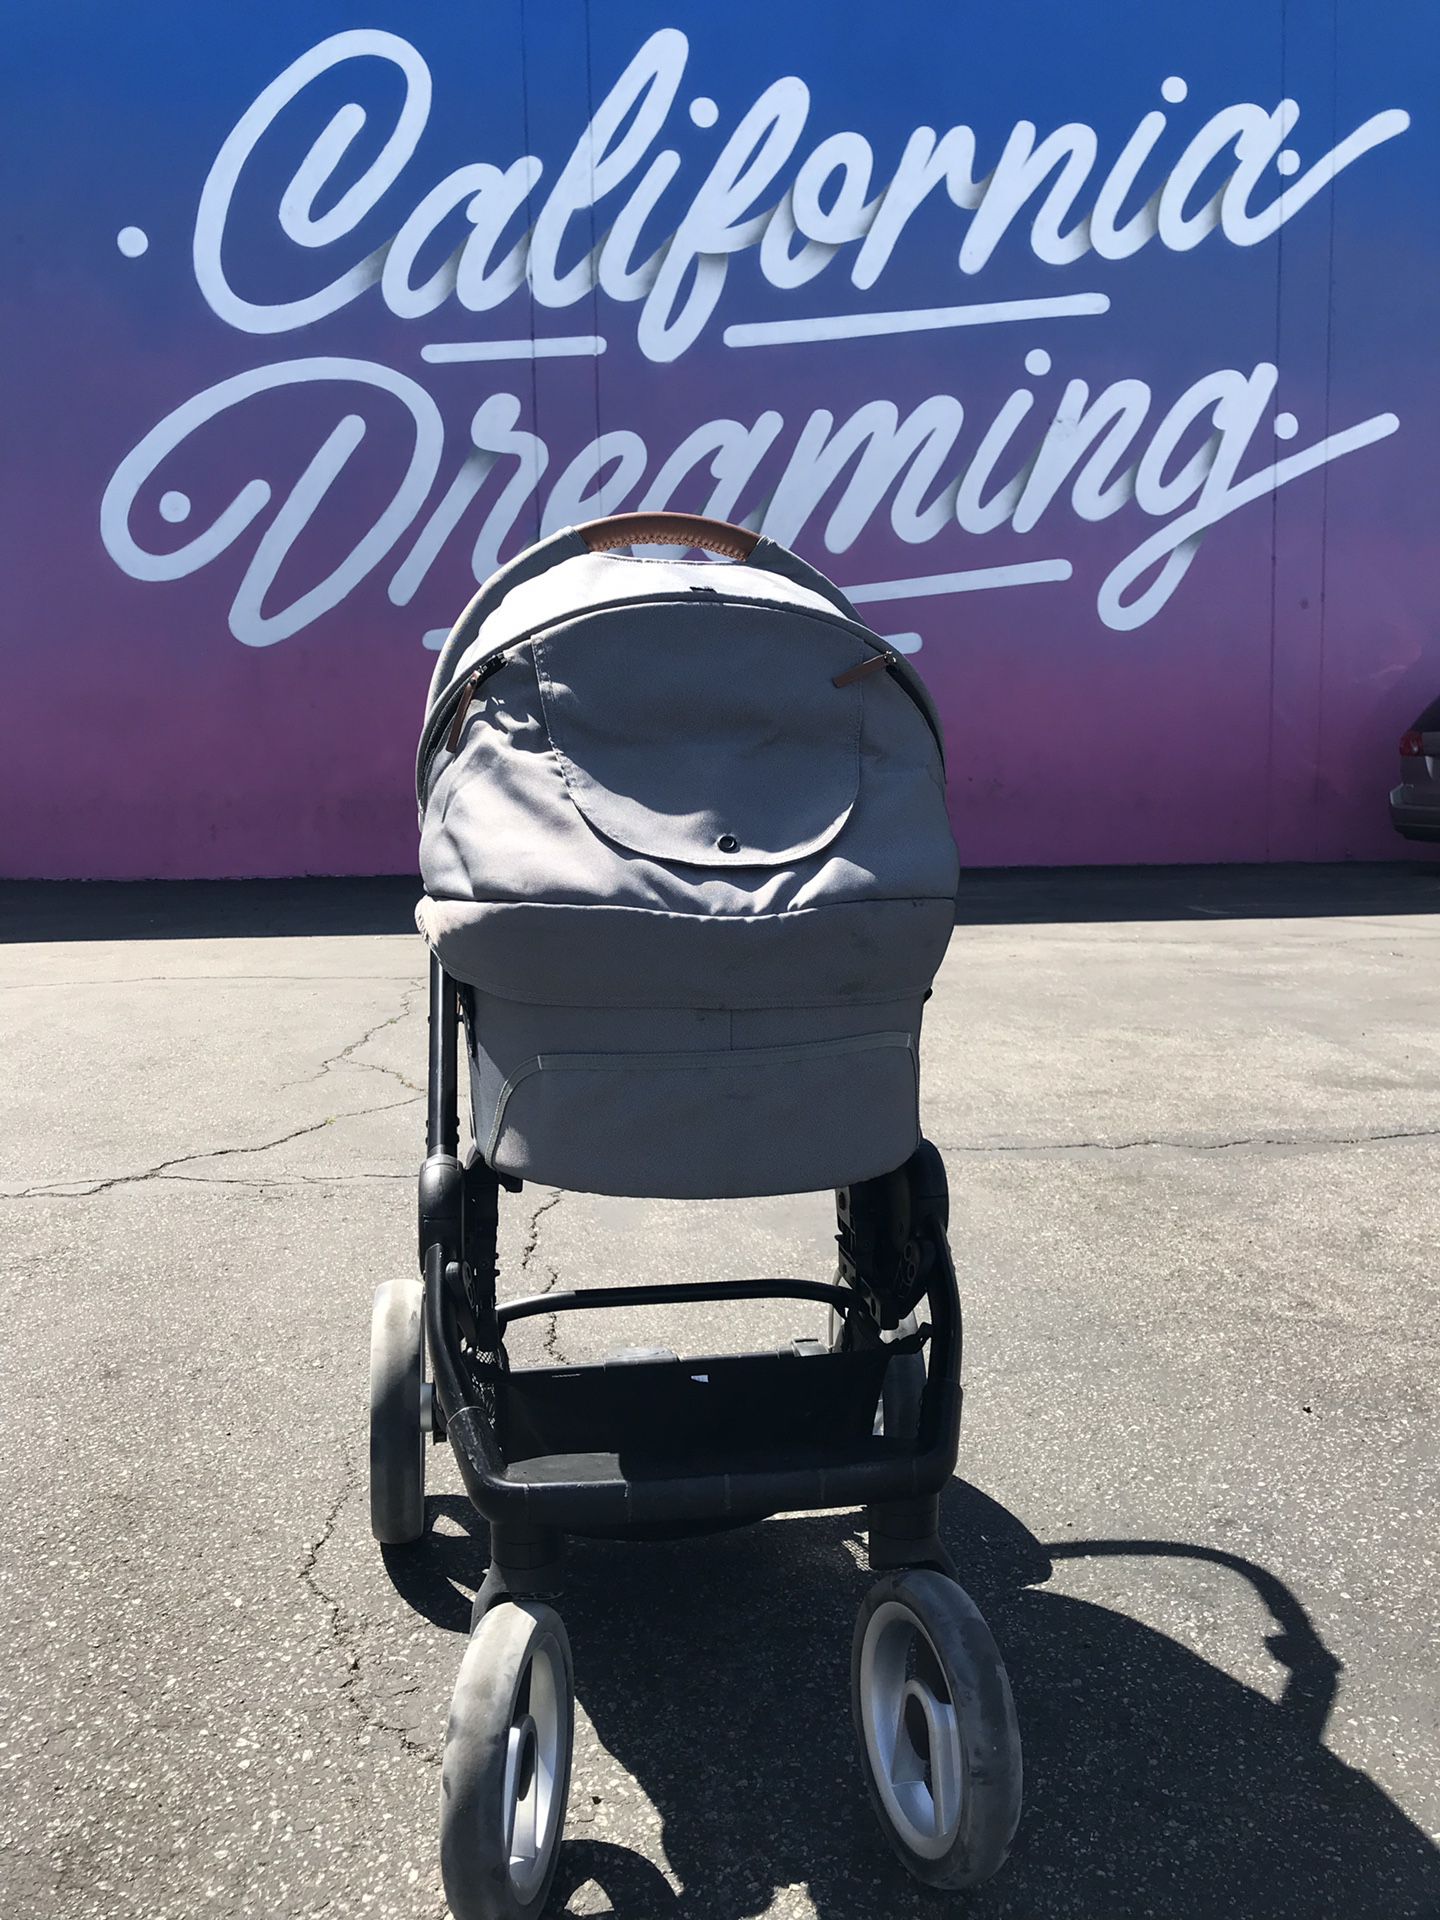 Mutsy stroller, stroller + car seat, stroller, car seat, Mutsy evo stroller, Mutsy evo, maxi maxi cosi mico max for Sale in West CA - OfferUp